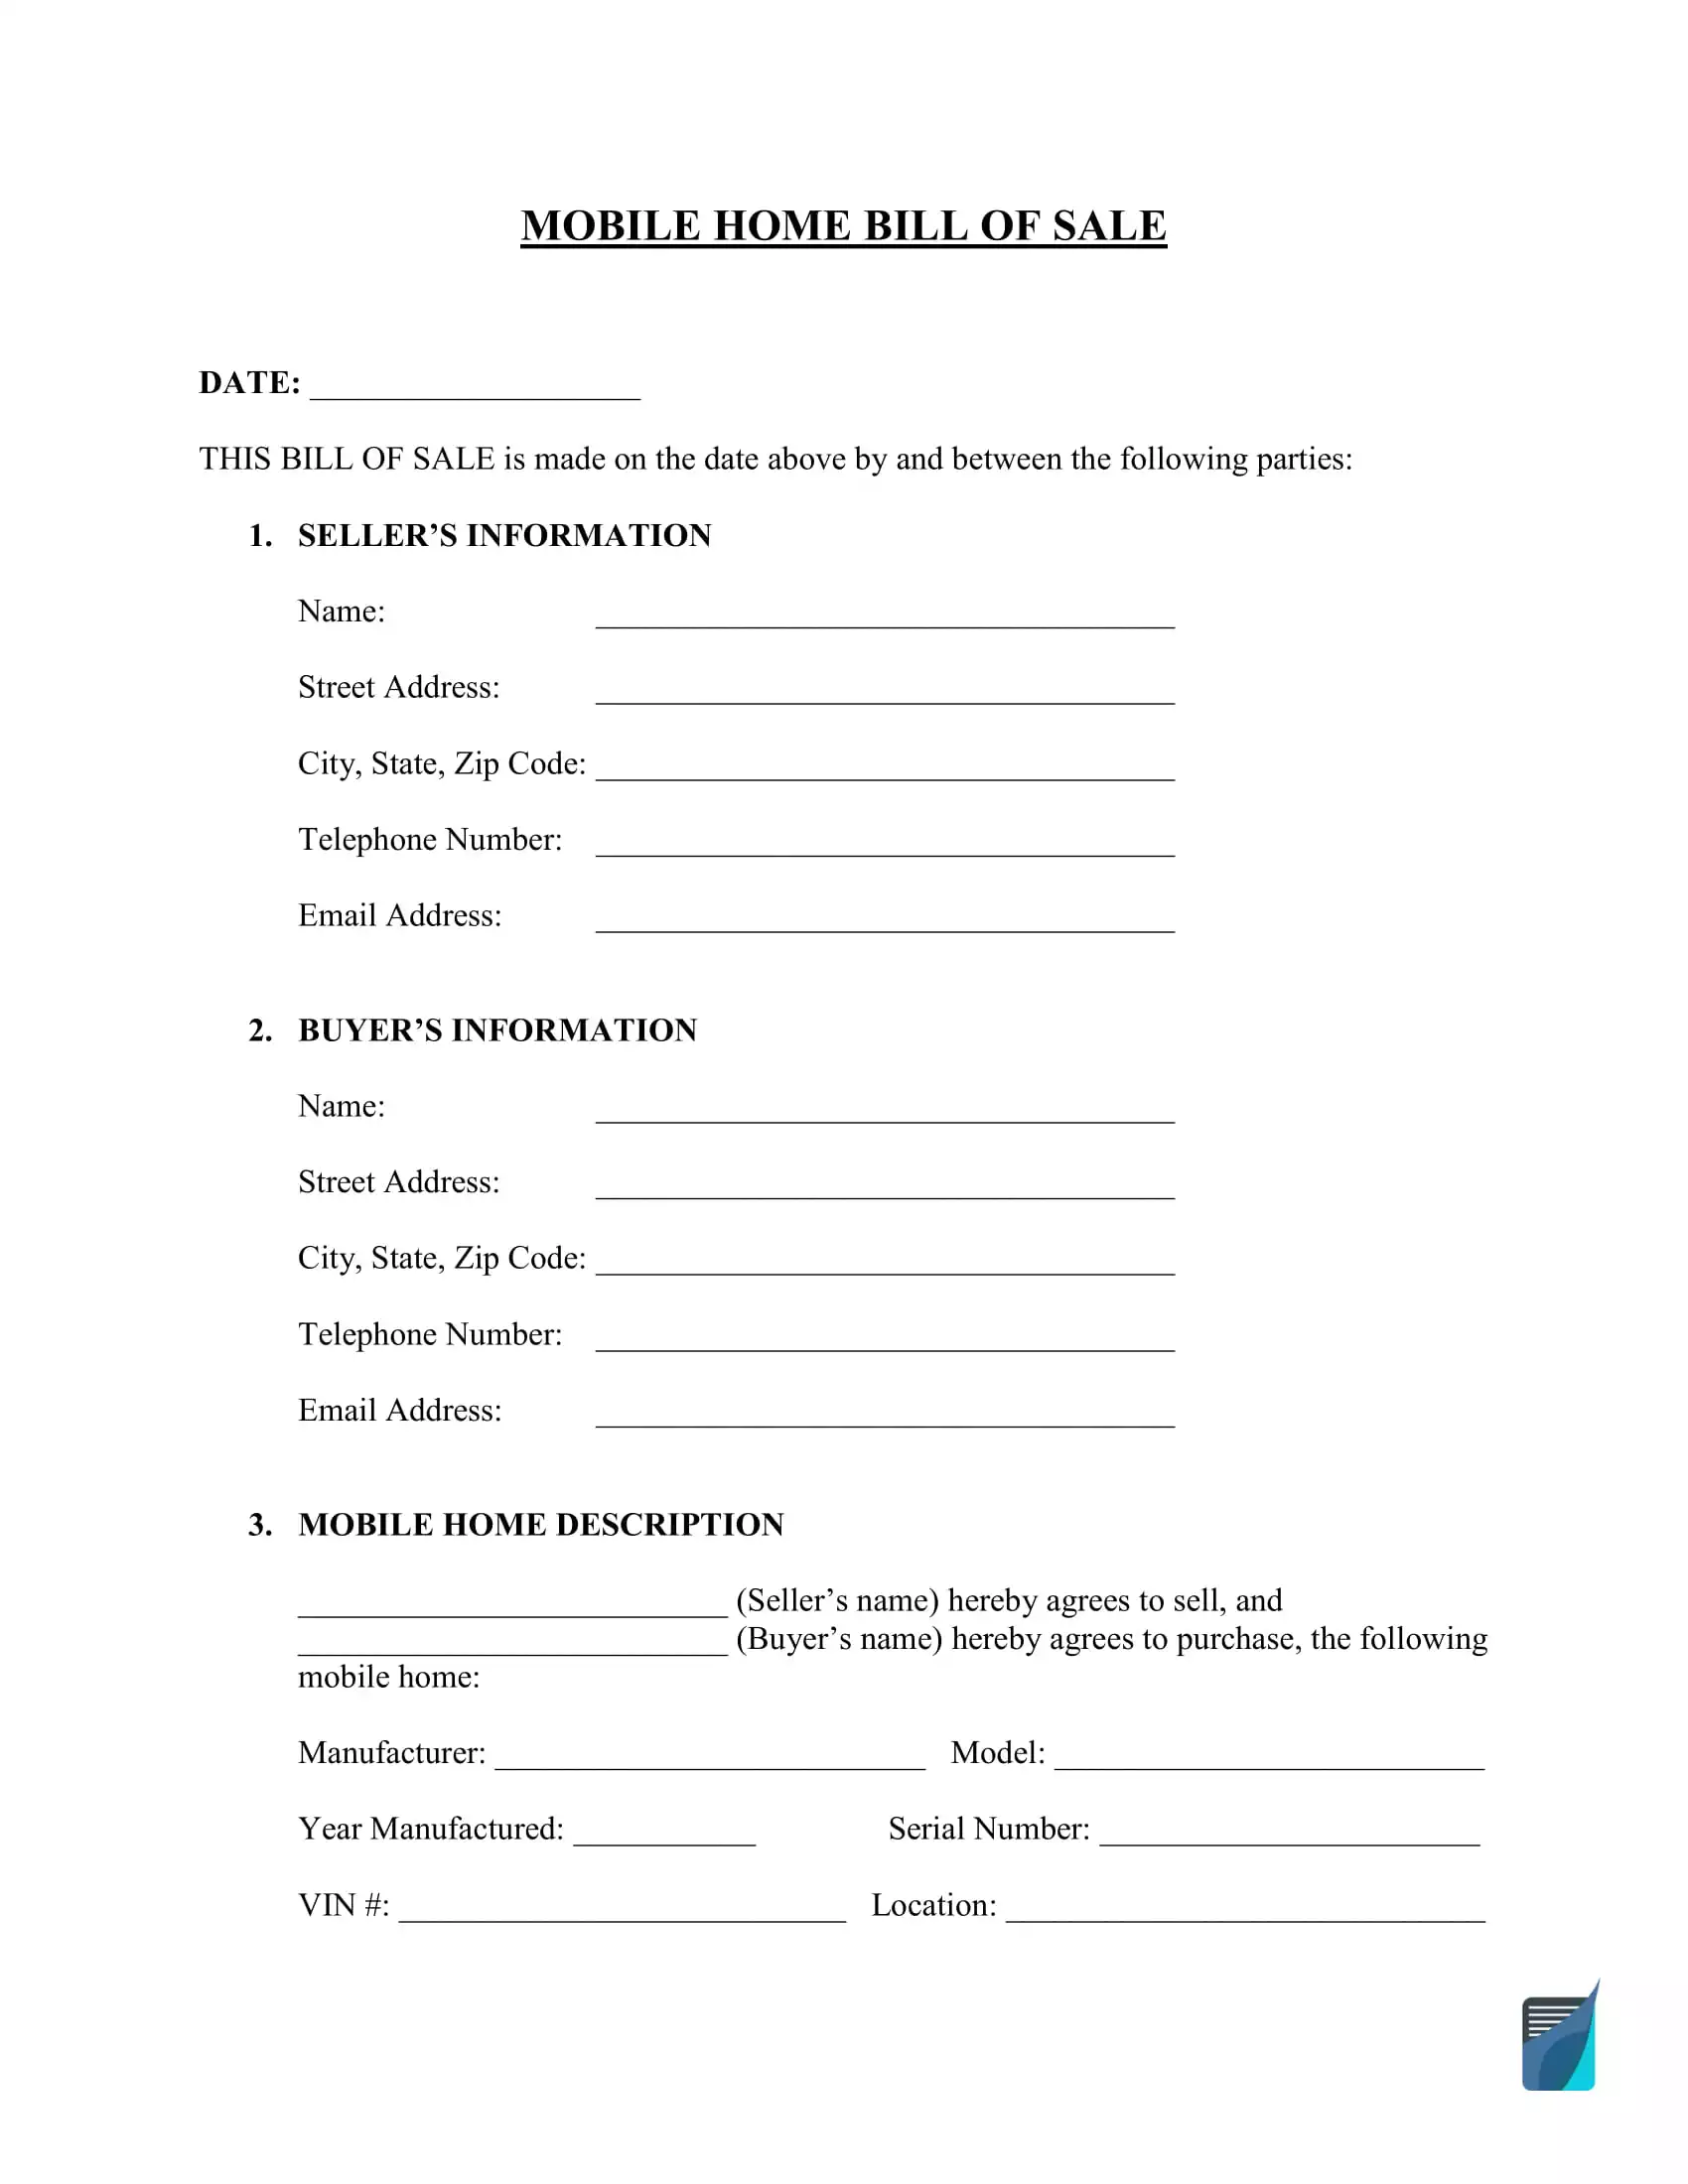 Free Mobile Home Bill Of Sale Form Template Formspal